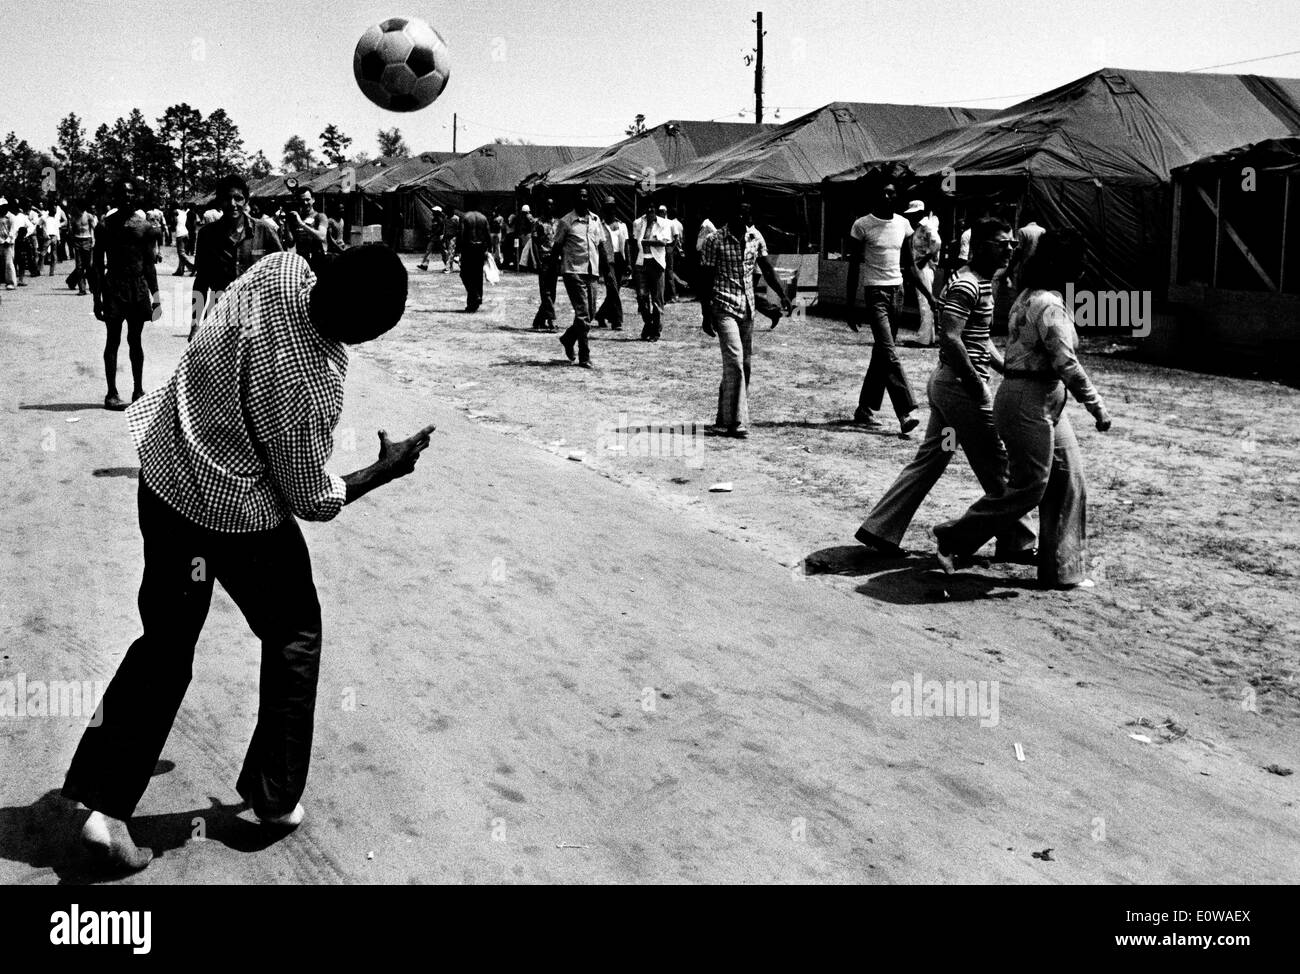 Cuban Refugees play soccer at tent city Stock Photo